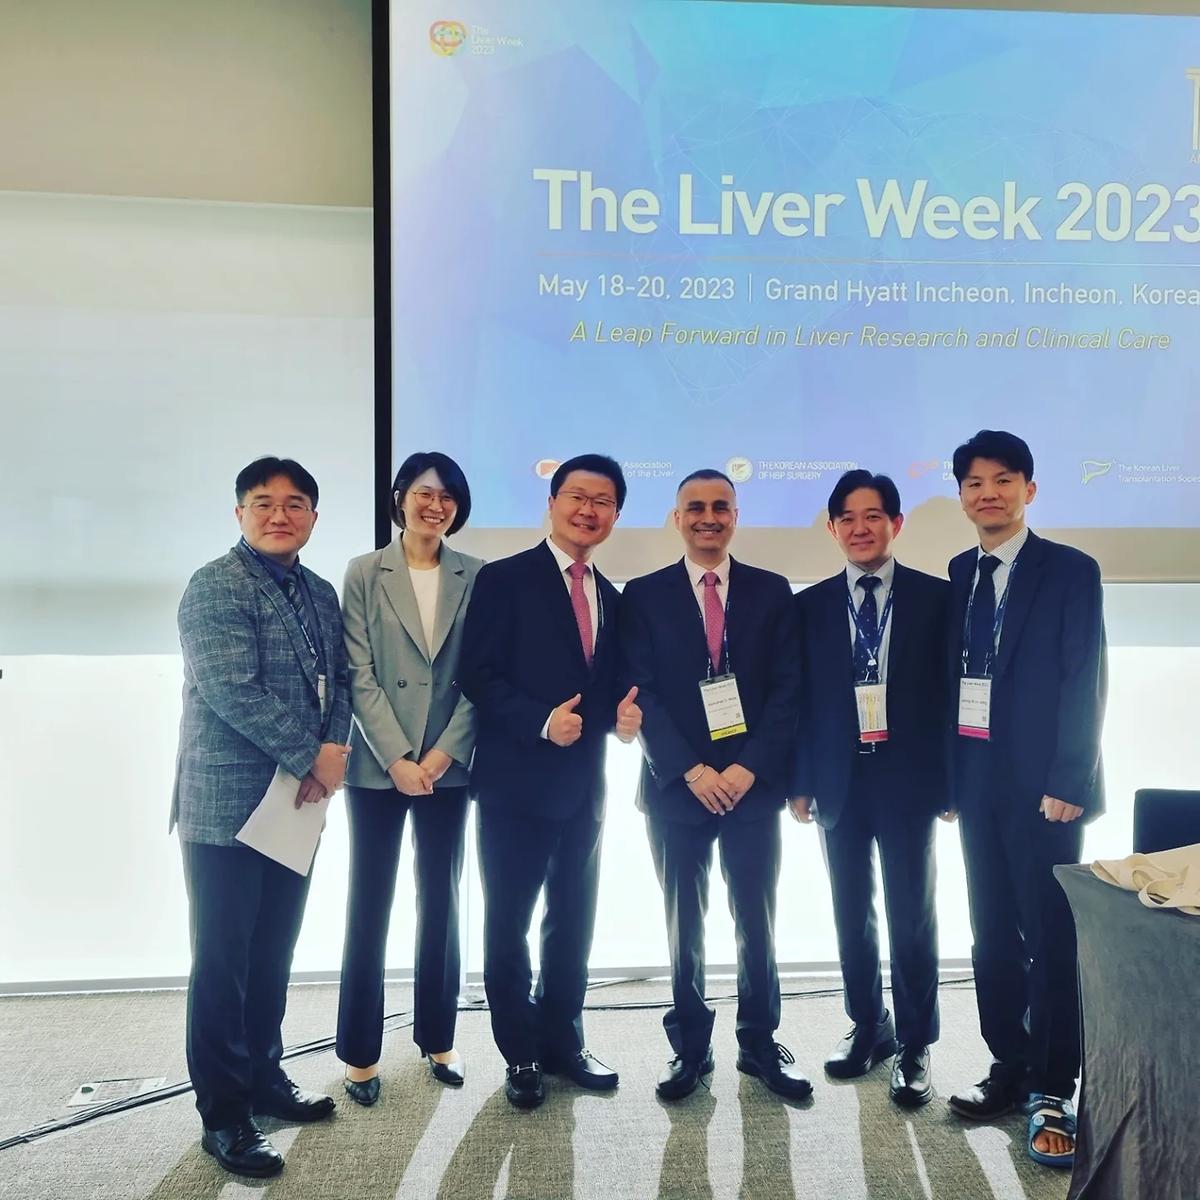 2023.05.18.-20. The Liver Week 2023 